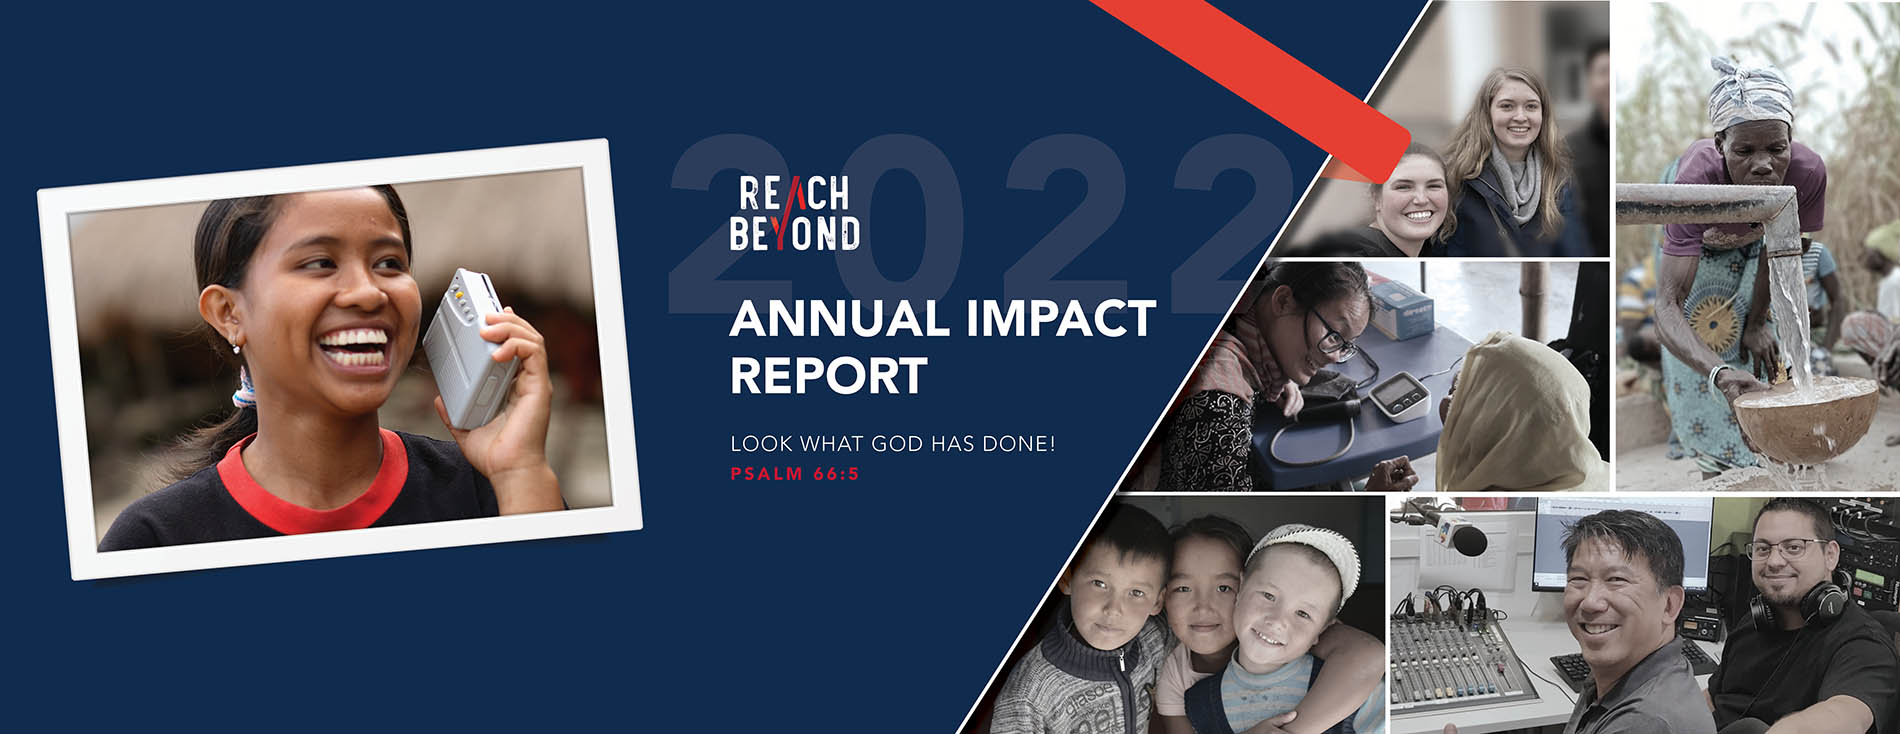 Annual Impact Report Cover